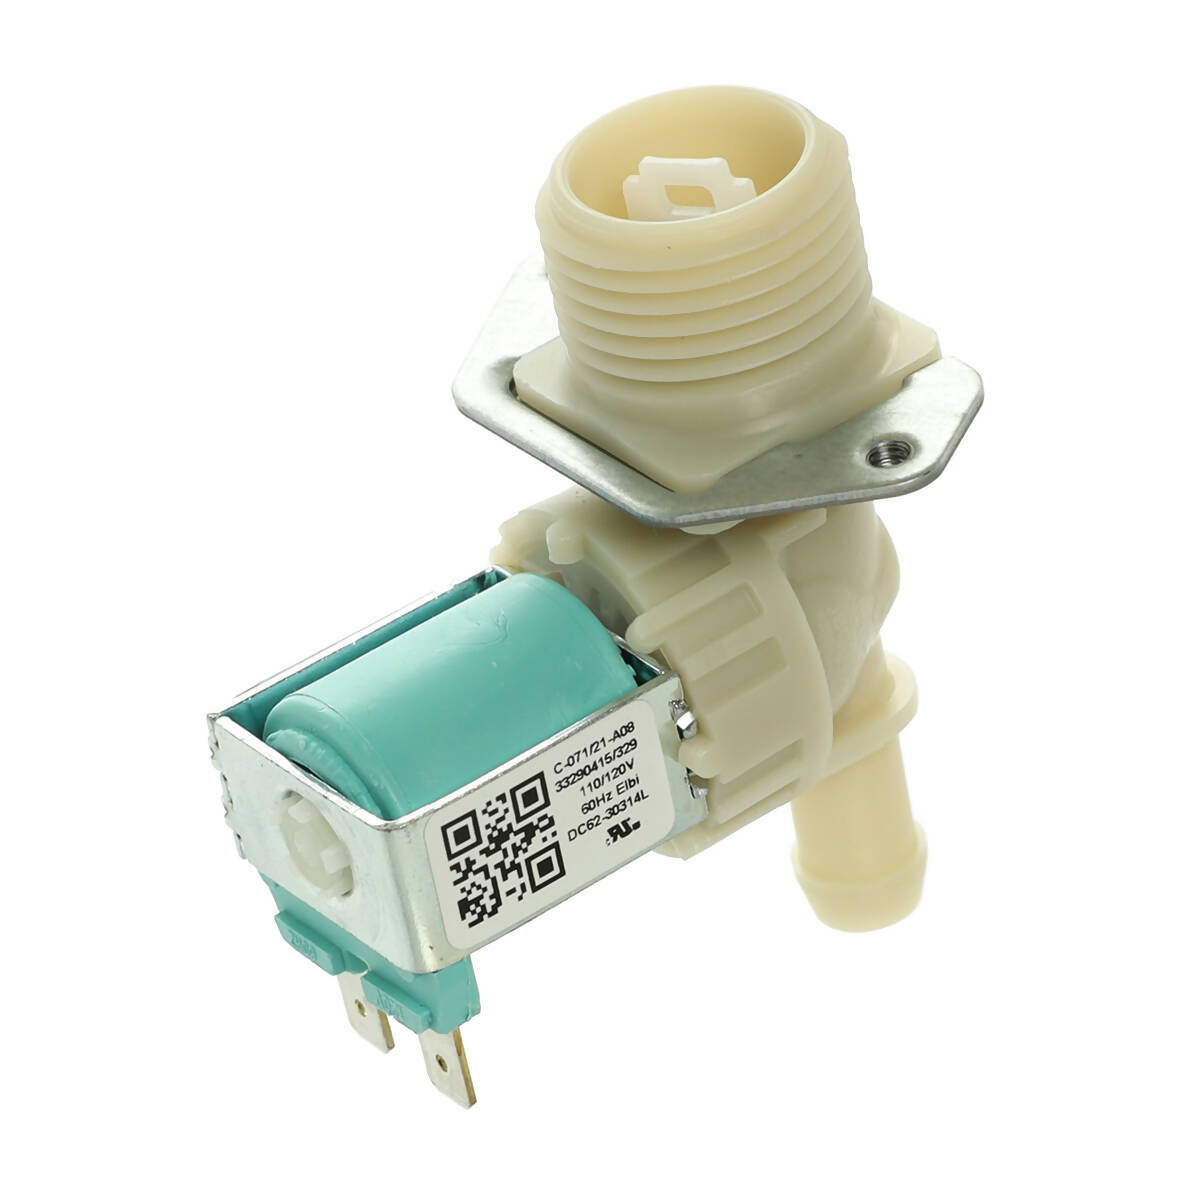 Samsung Washer Water Inlet Valve - DC62-30314L, Replaces: DC6230314L DD81-02065A DD8102065A 113113 3992459 AP5582579 PS4208749 EAP4208749 PD00041597